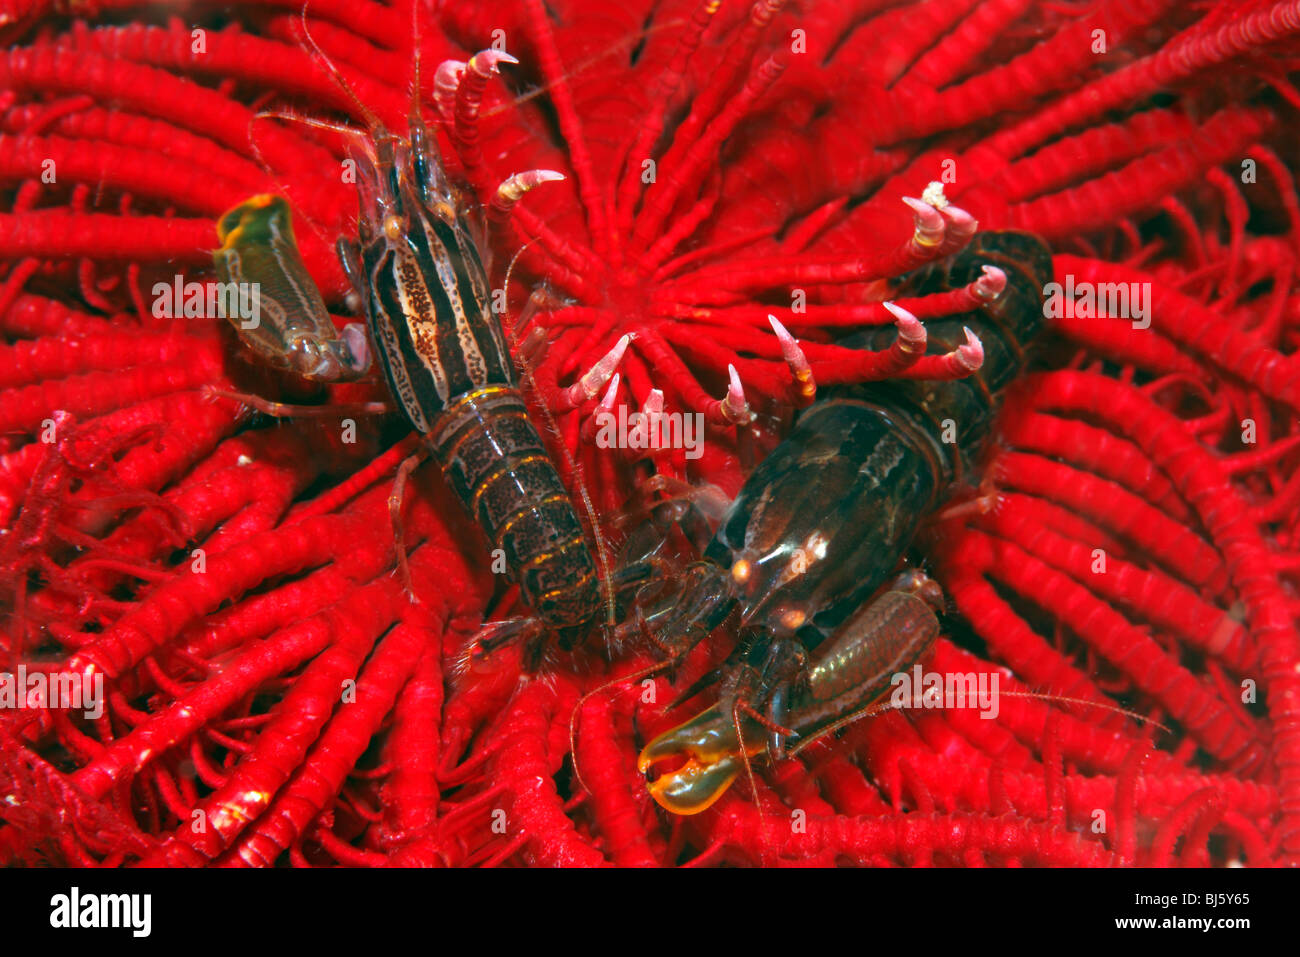 Stimpson’s Snapping Shrimps, Synalpheus stimpsoni, living underneath a crinoid, or featherstar. Stock Photo